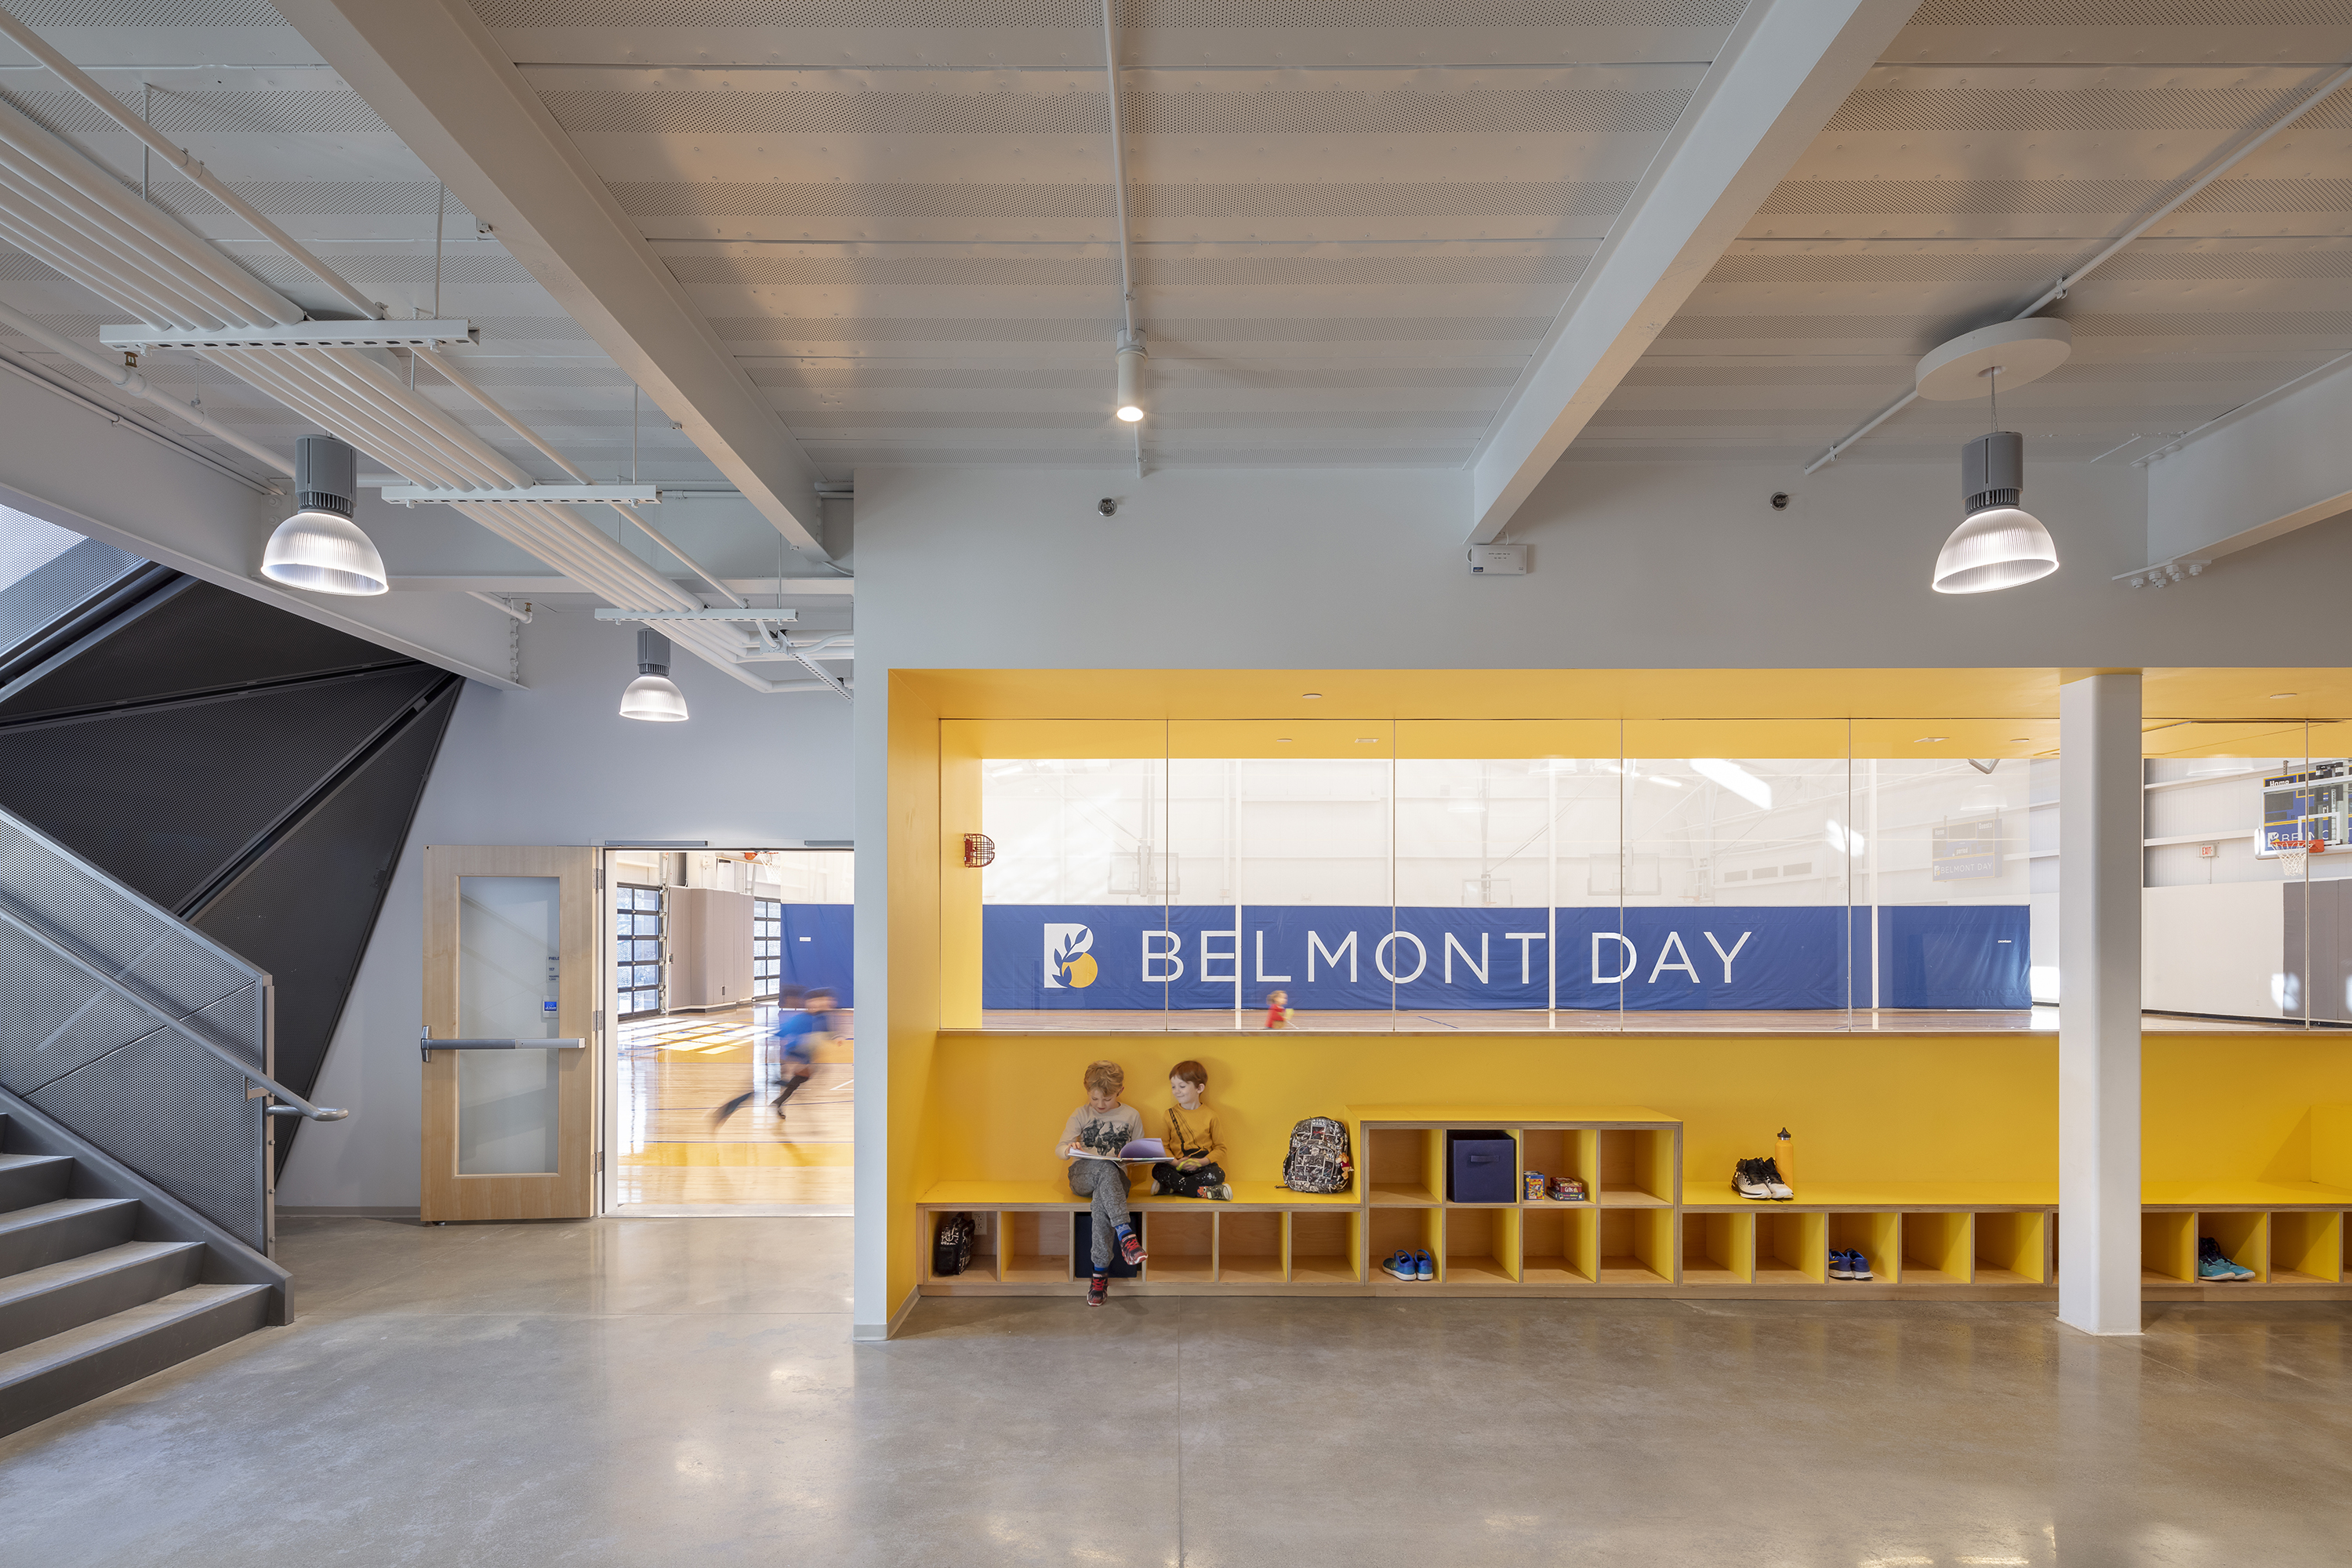 Belmont Day School Barn wins 2021 AIA Education Facility Design Award of Excellence!